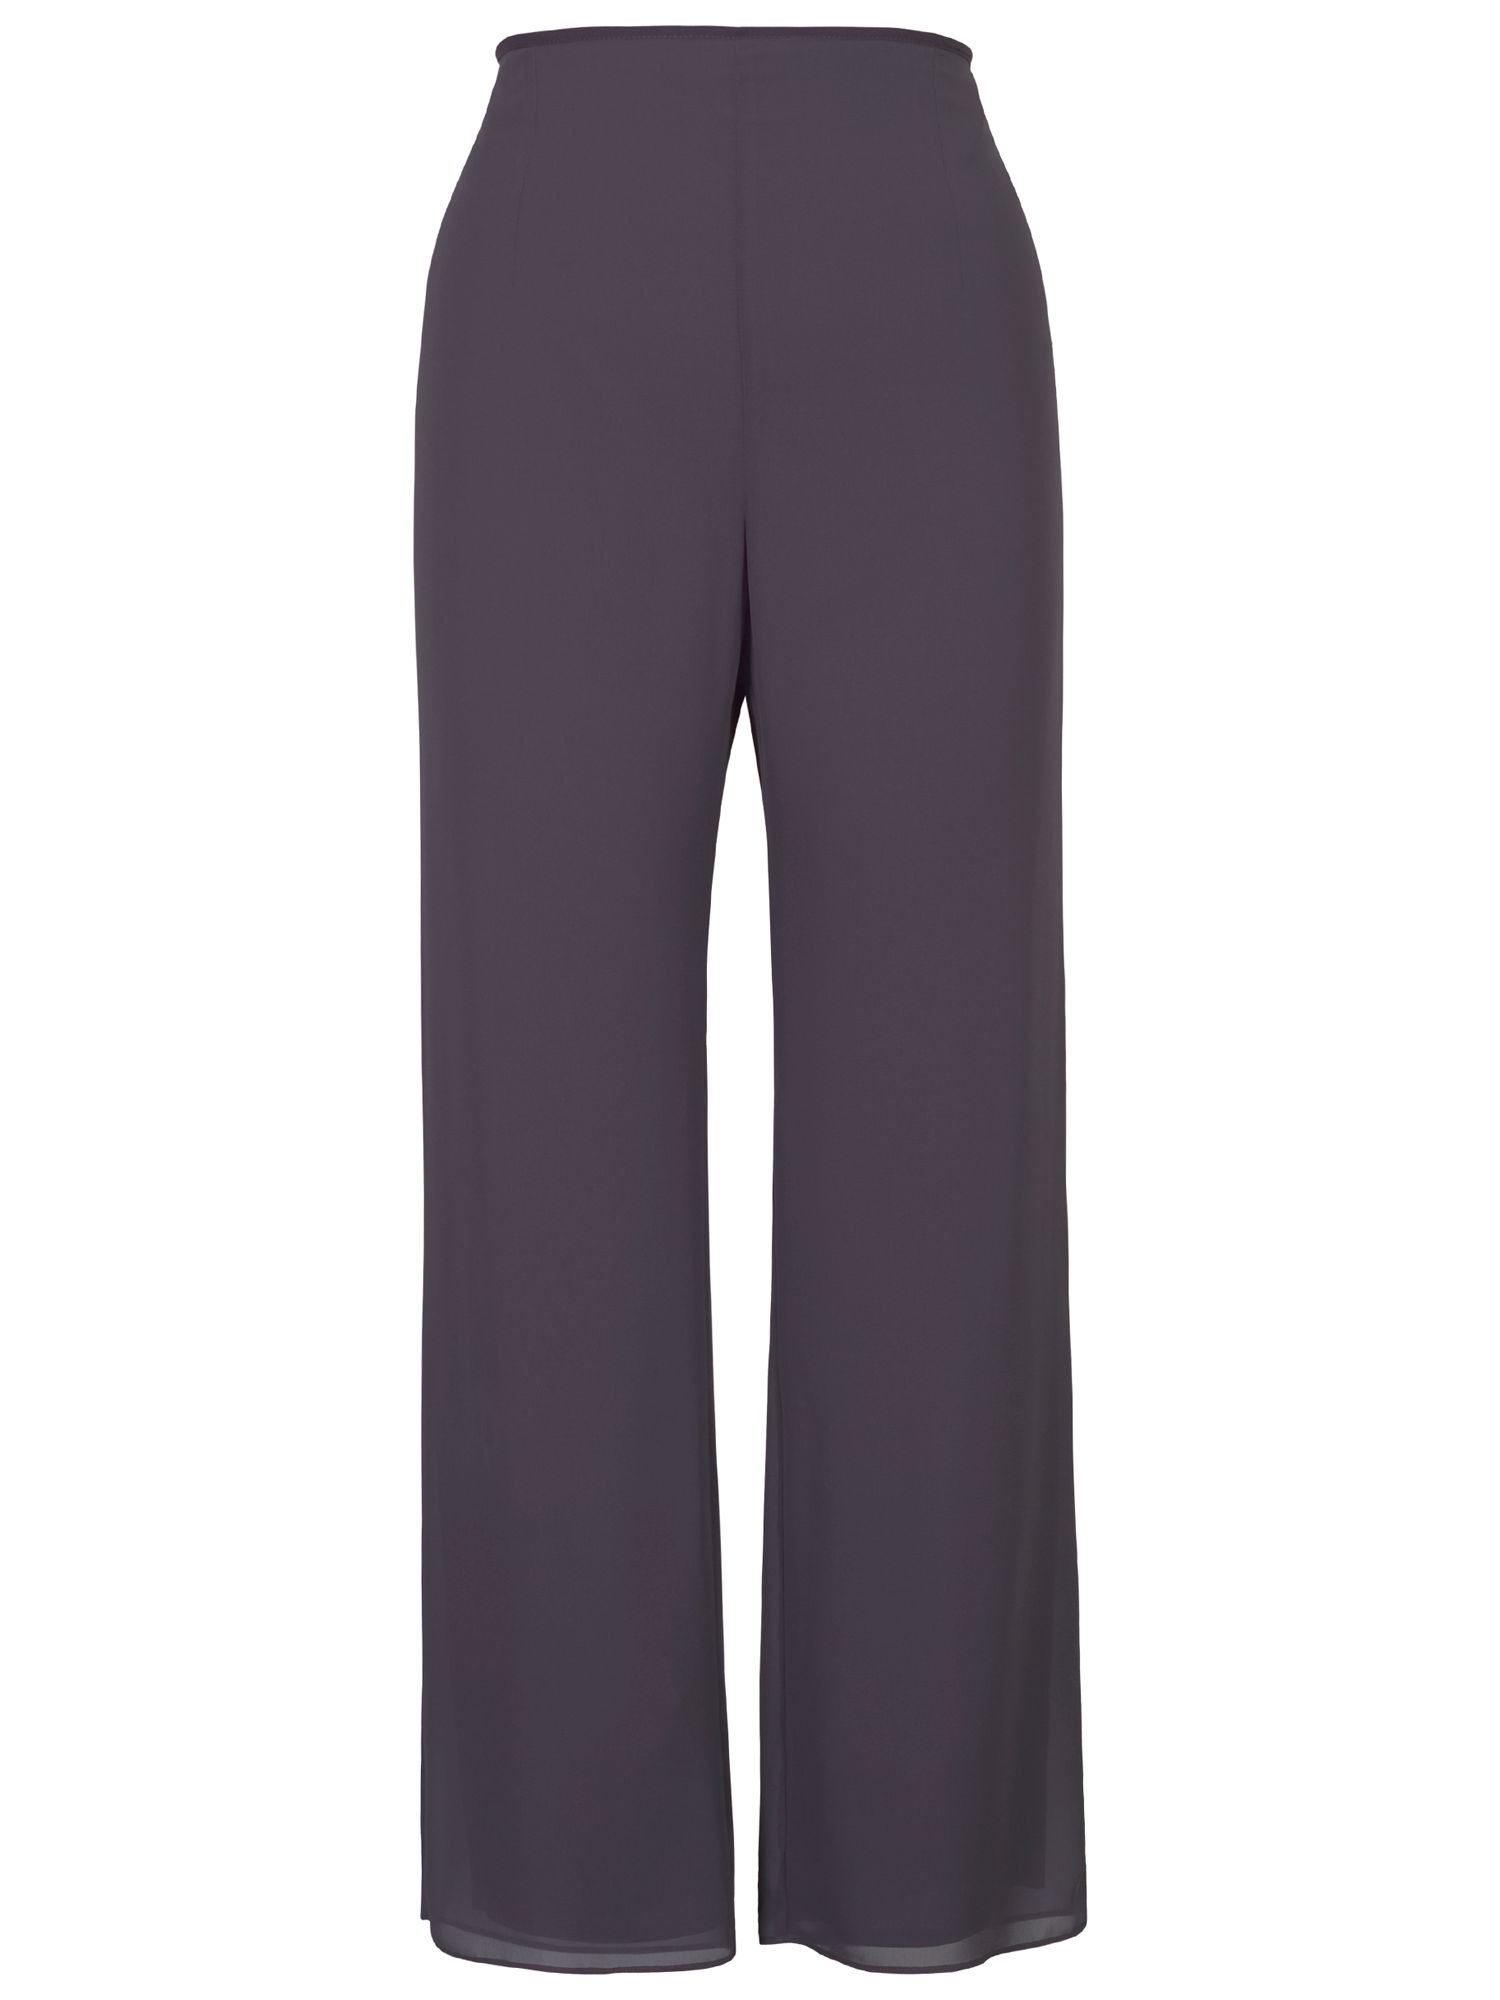 Chesca Satin Trim Chiffon Trousers, Pewter at John Lewis & Partners